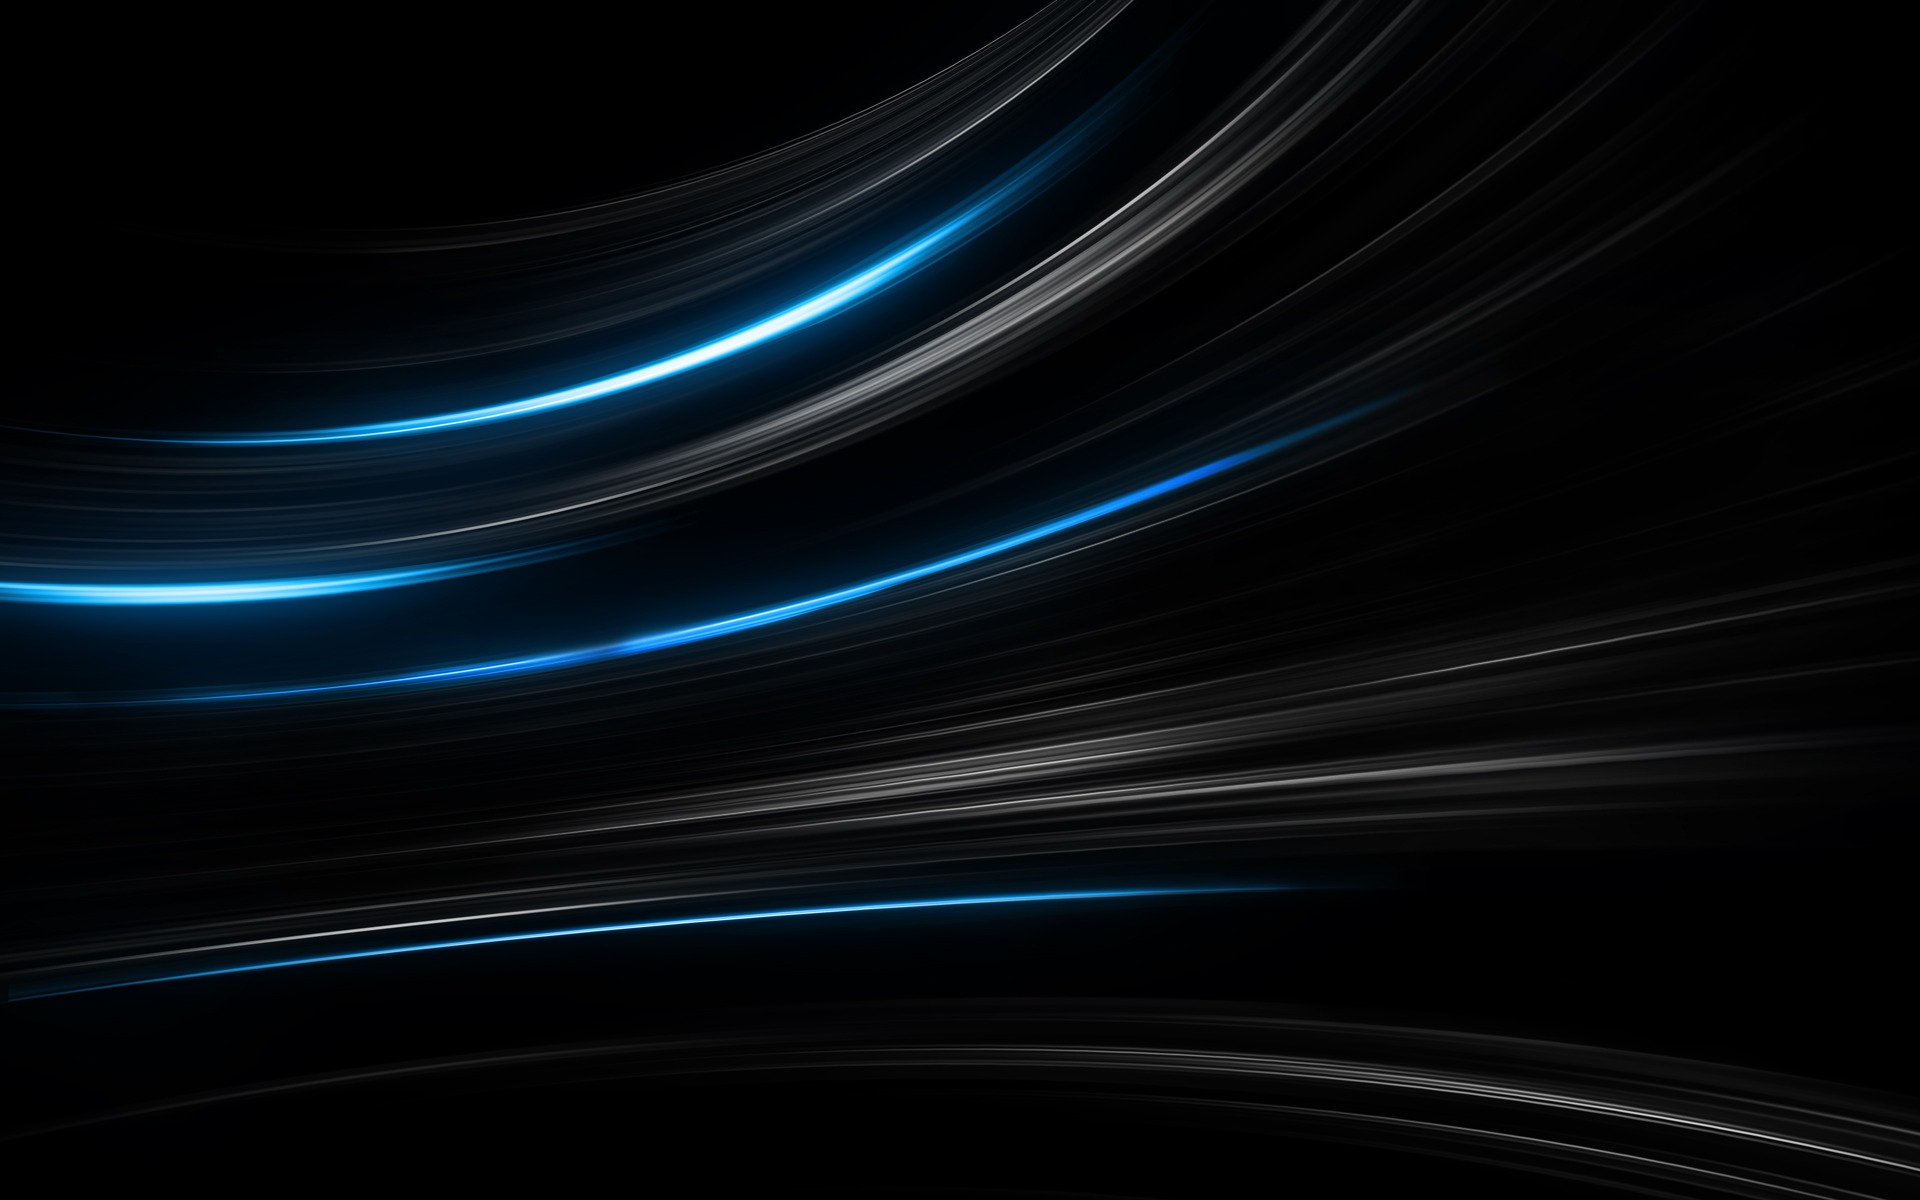 light-blue-and-black-abstract-5-wallpaper-background-hd